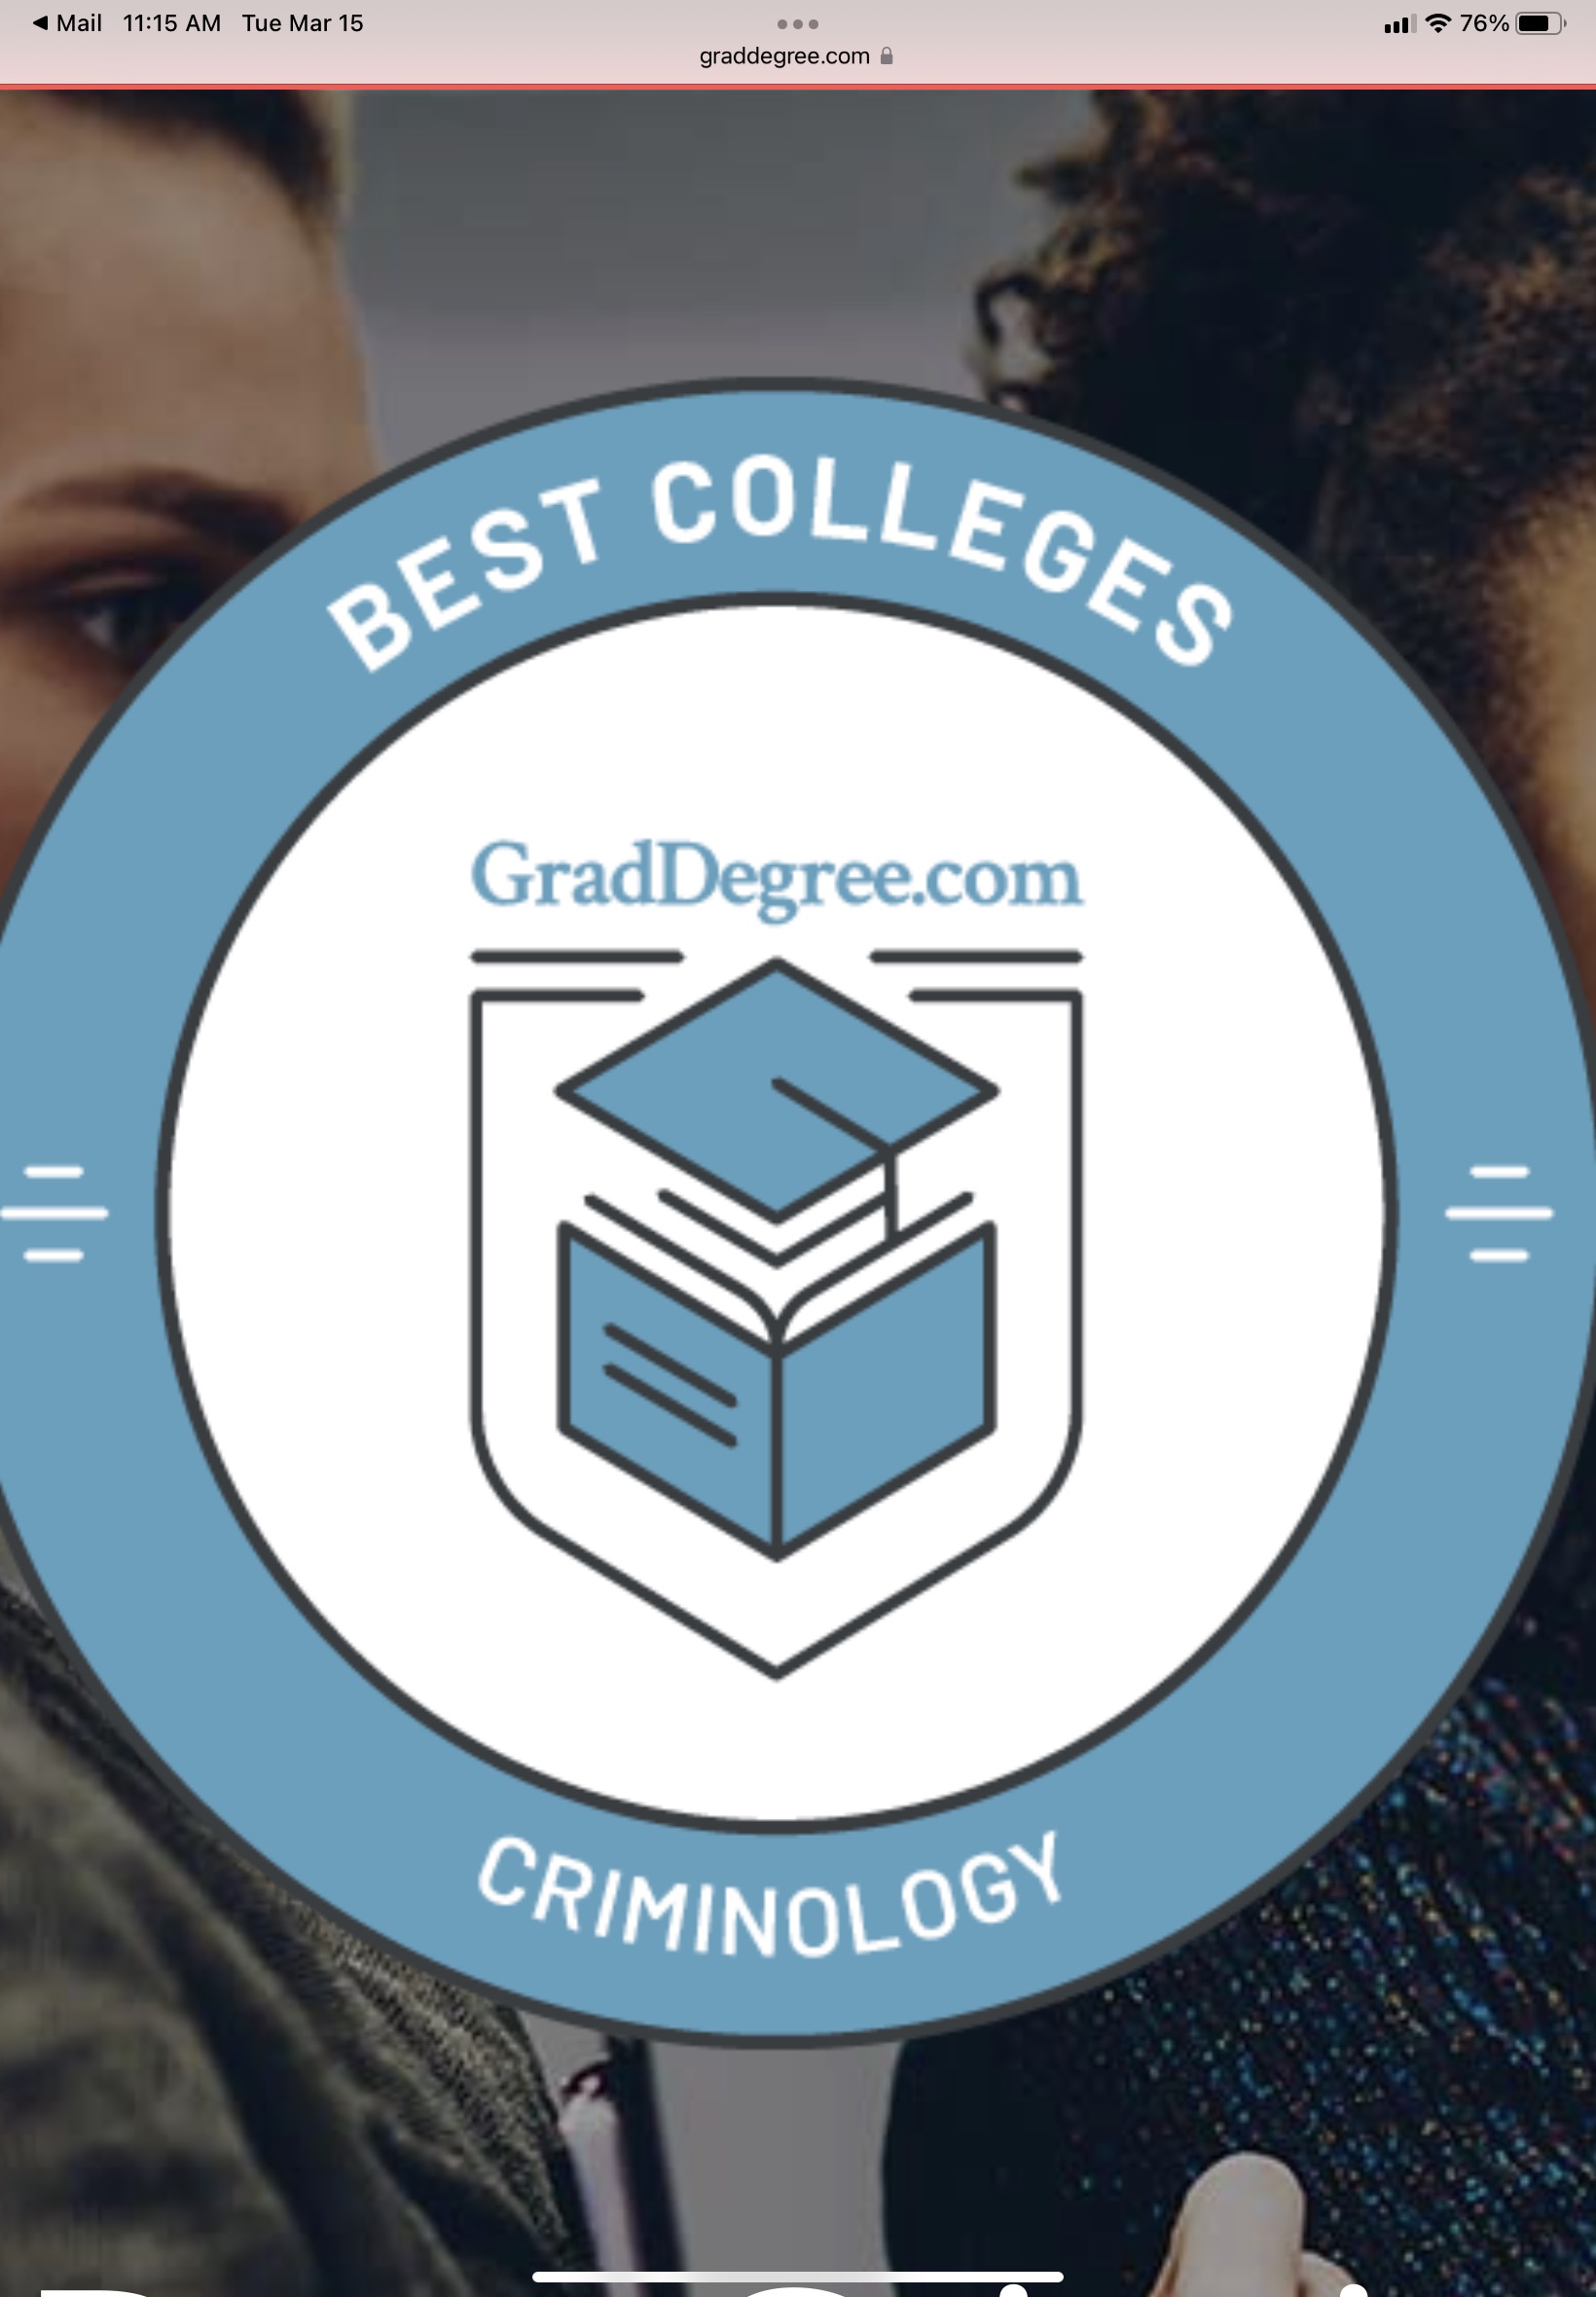 Coker Criminology Program Named to Two Top Lists